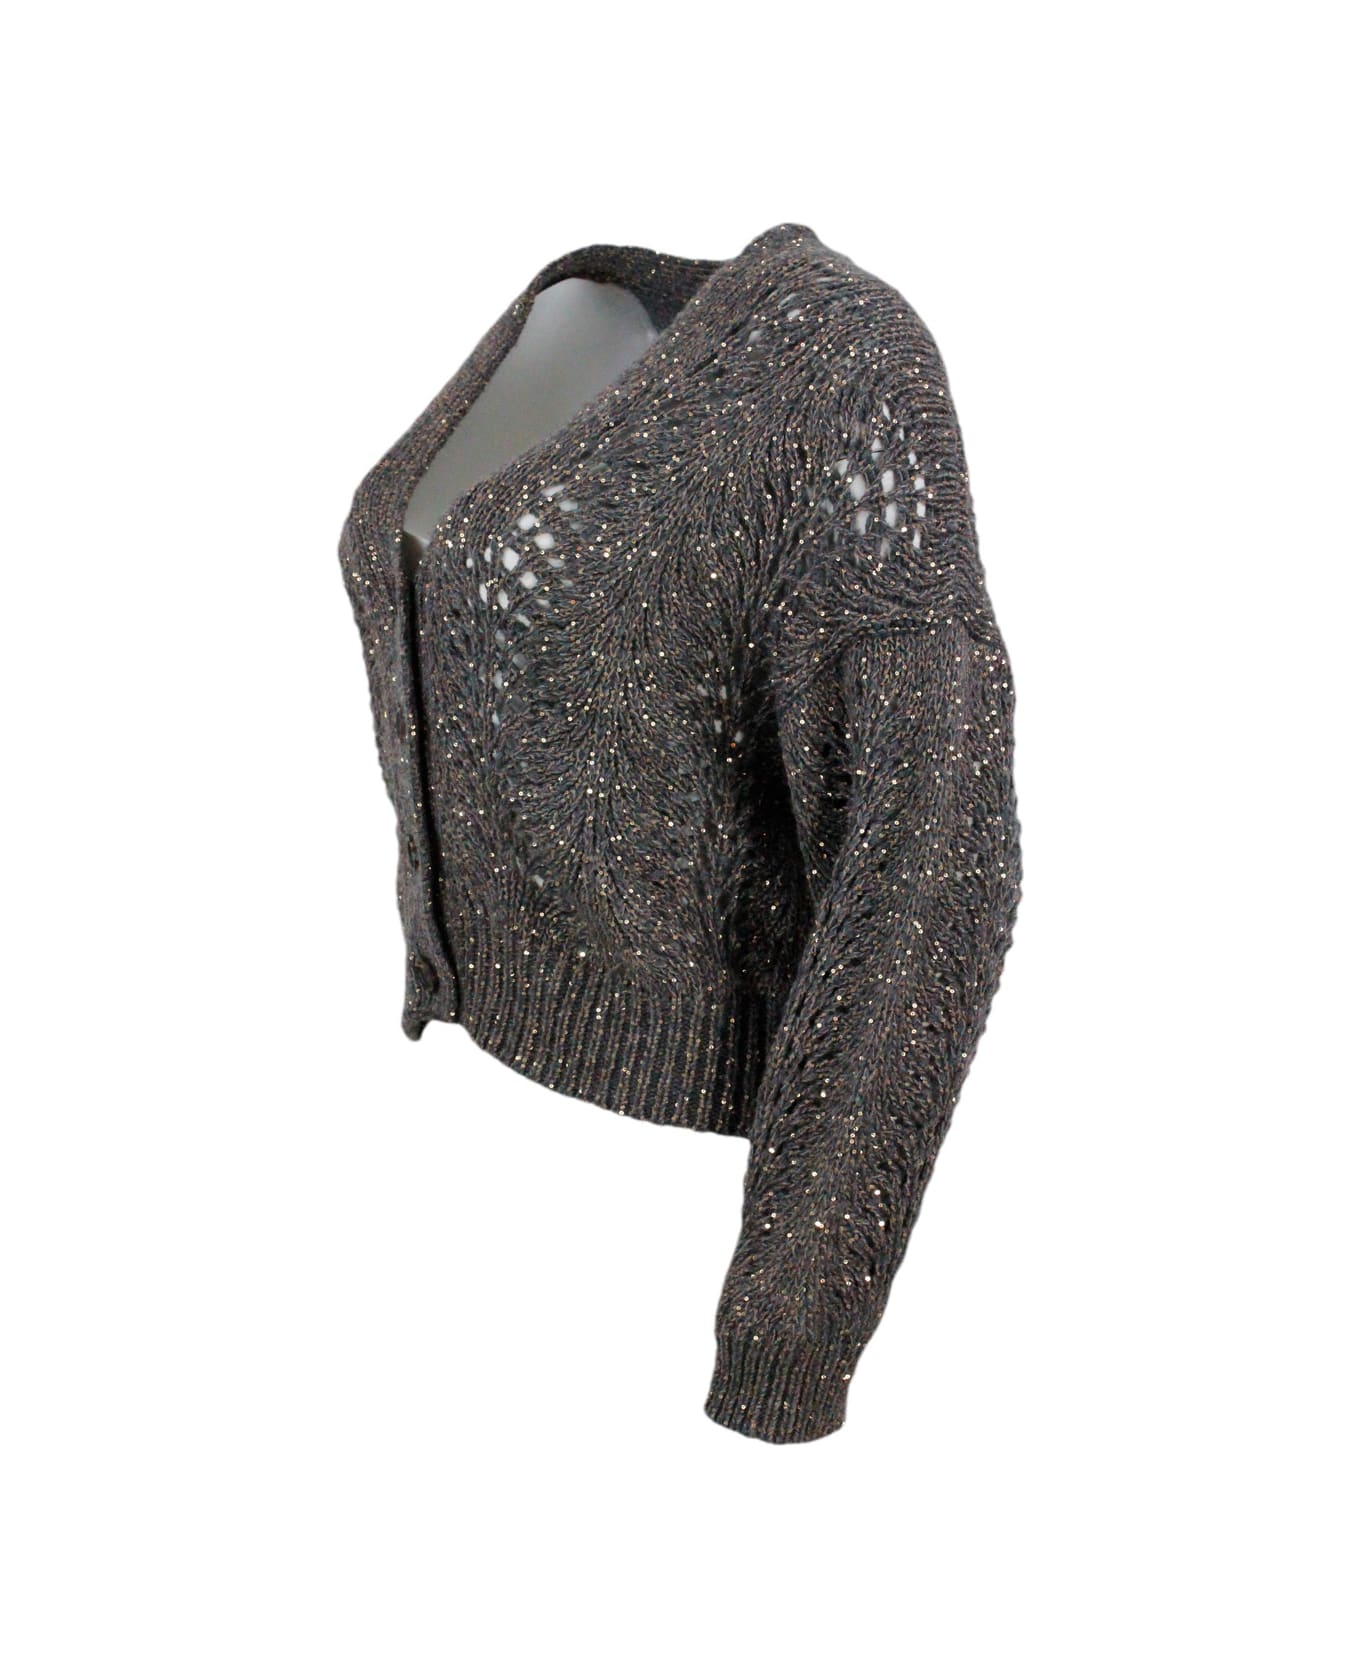 Brunello Cucinelli Cardigan Sweater With Buttons In Precious And Refined Feather Cashmere Embellished With A Dazzling Yarn With Sequins For A Shiny And Three-dimensional - Grey